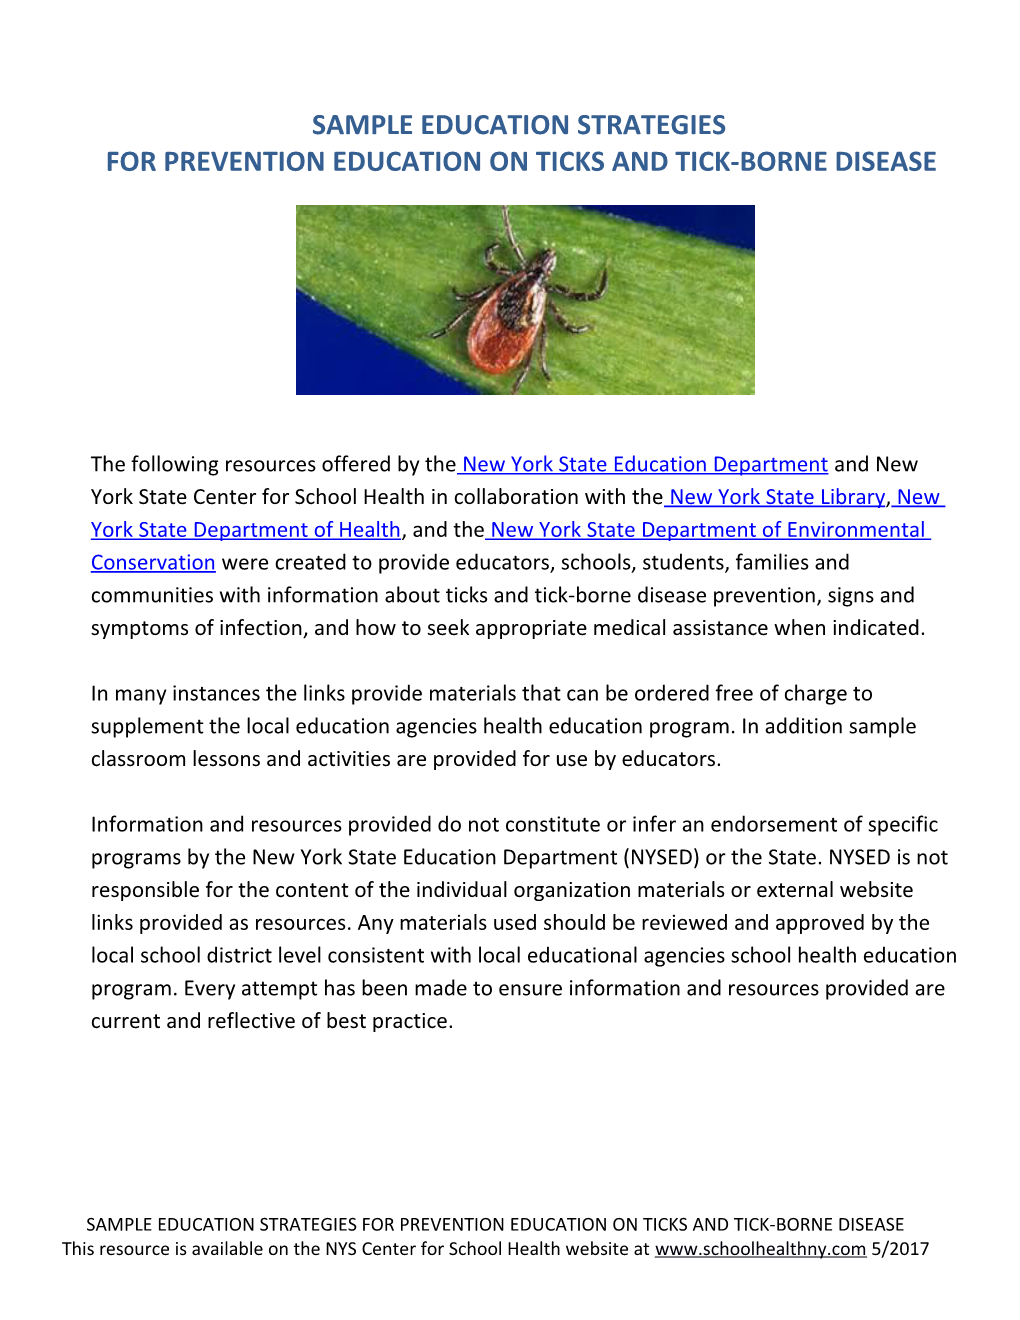 Sample Education Strategies for Prevention Education on Ticks and Tick-Borne Disease